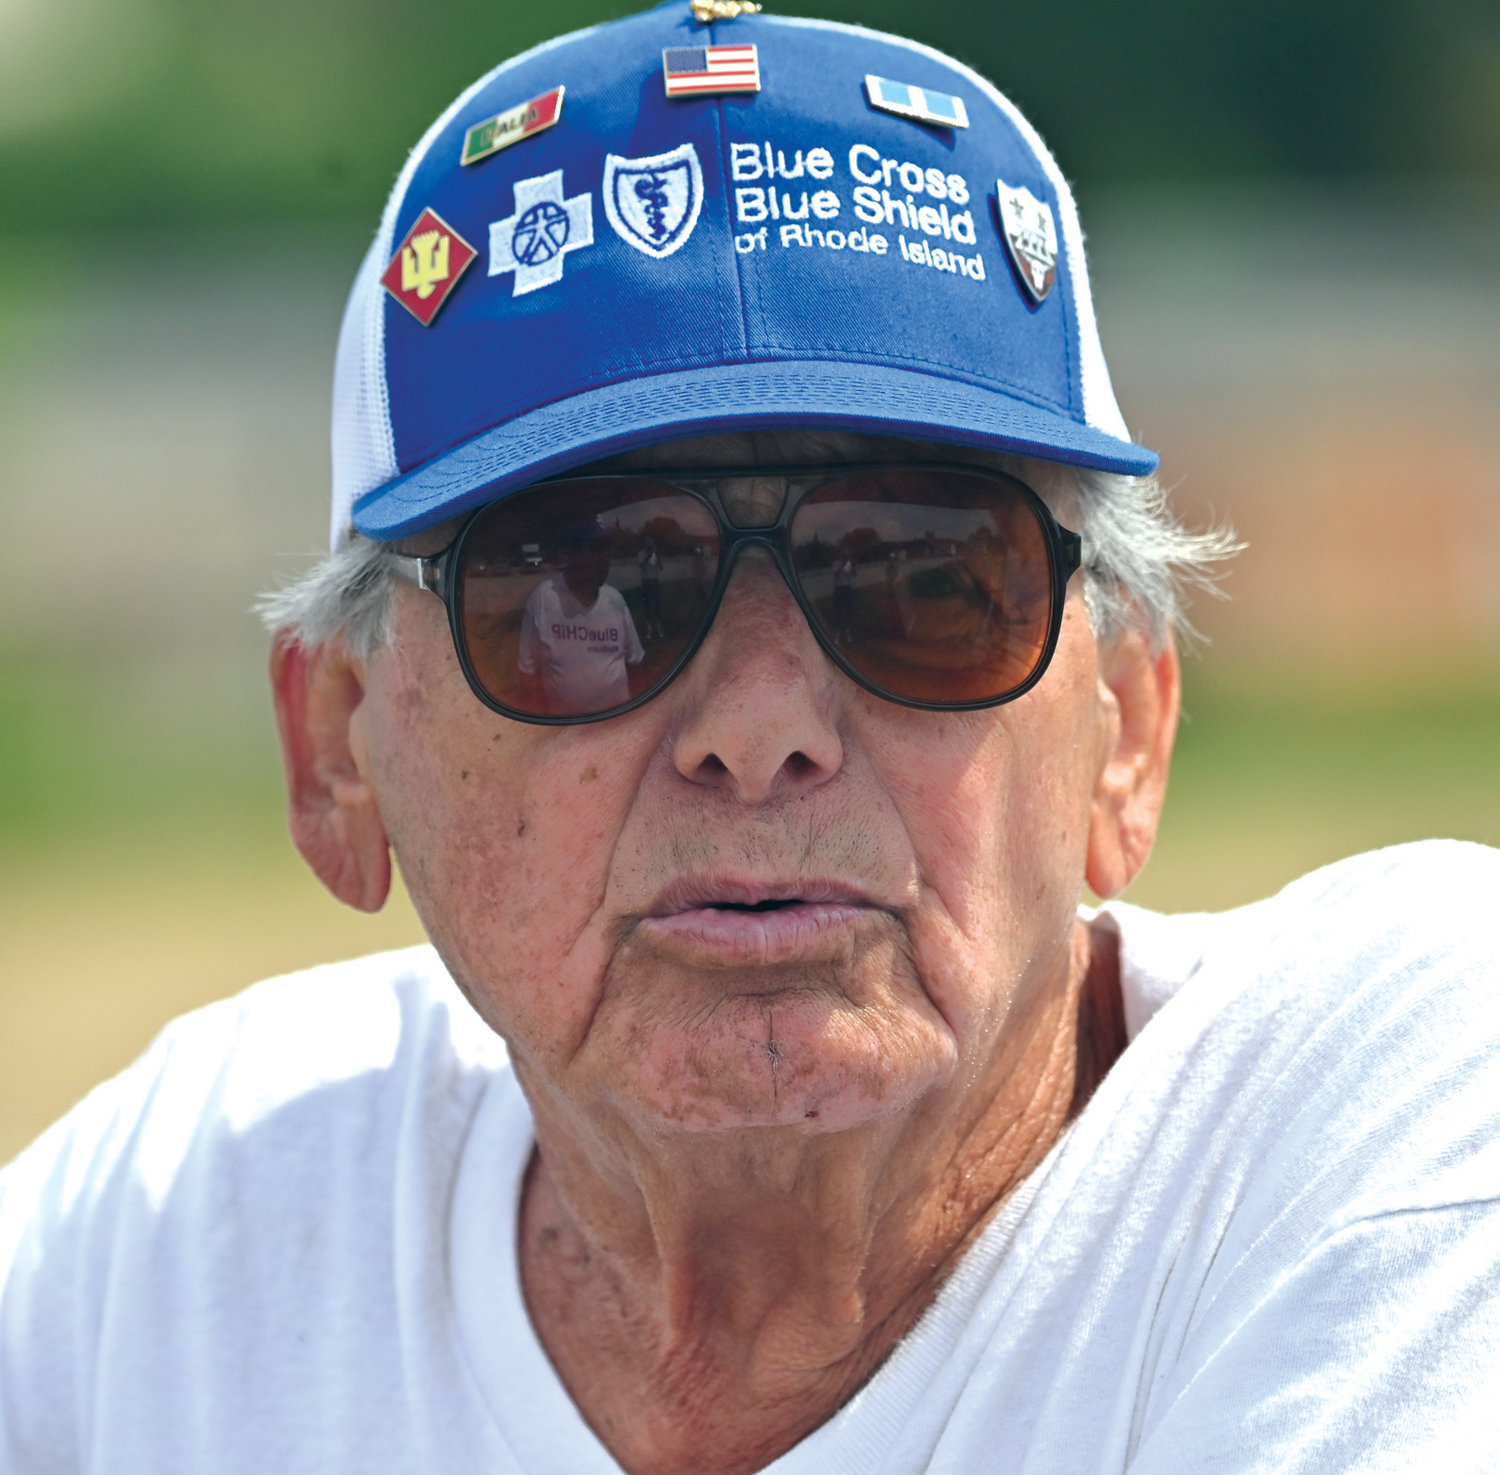 GOING STRONG: Cranston’s Joe Giordano, who is one of the founders of the Rhode Island Senior Softball League, watches a game during the 2019 season. Giordano recently turned 90 years old as the league celebrates its 37th year. Giordano, who is currently the manager of the Blue Cross team and a member of the board of directors, still hits the field on occasion as the league’s oldest player.